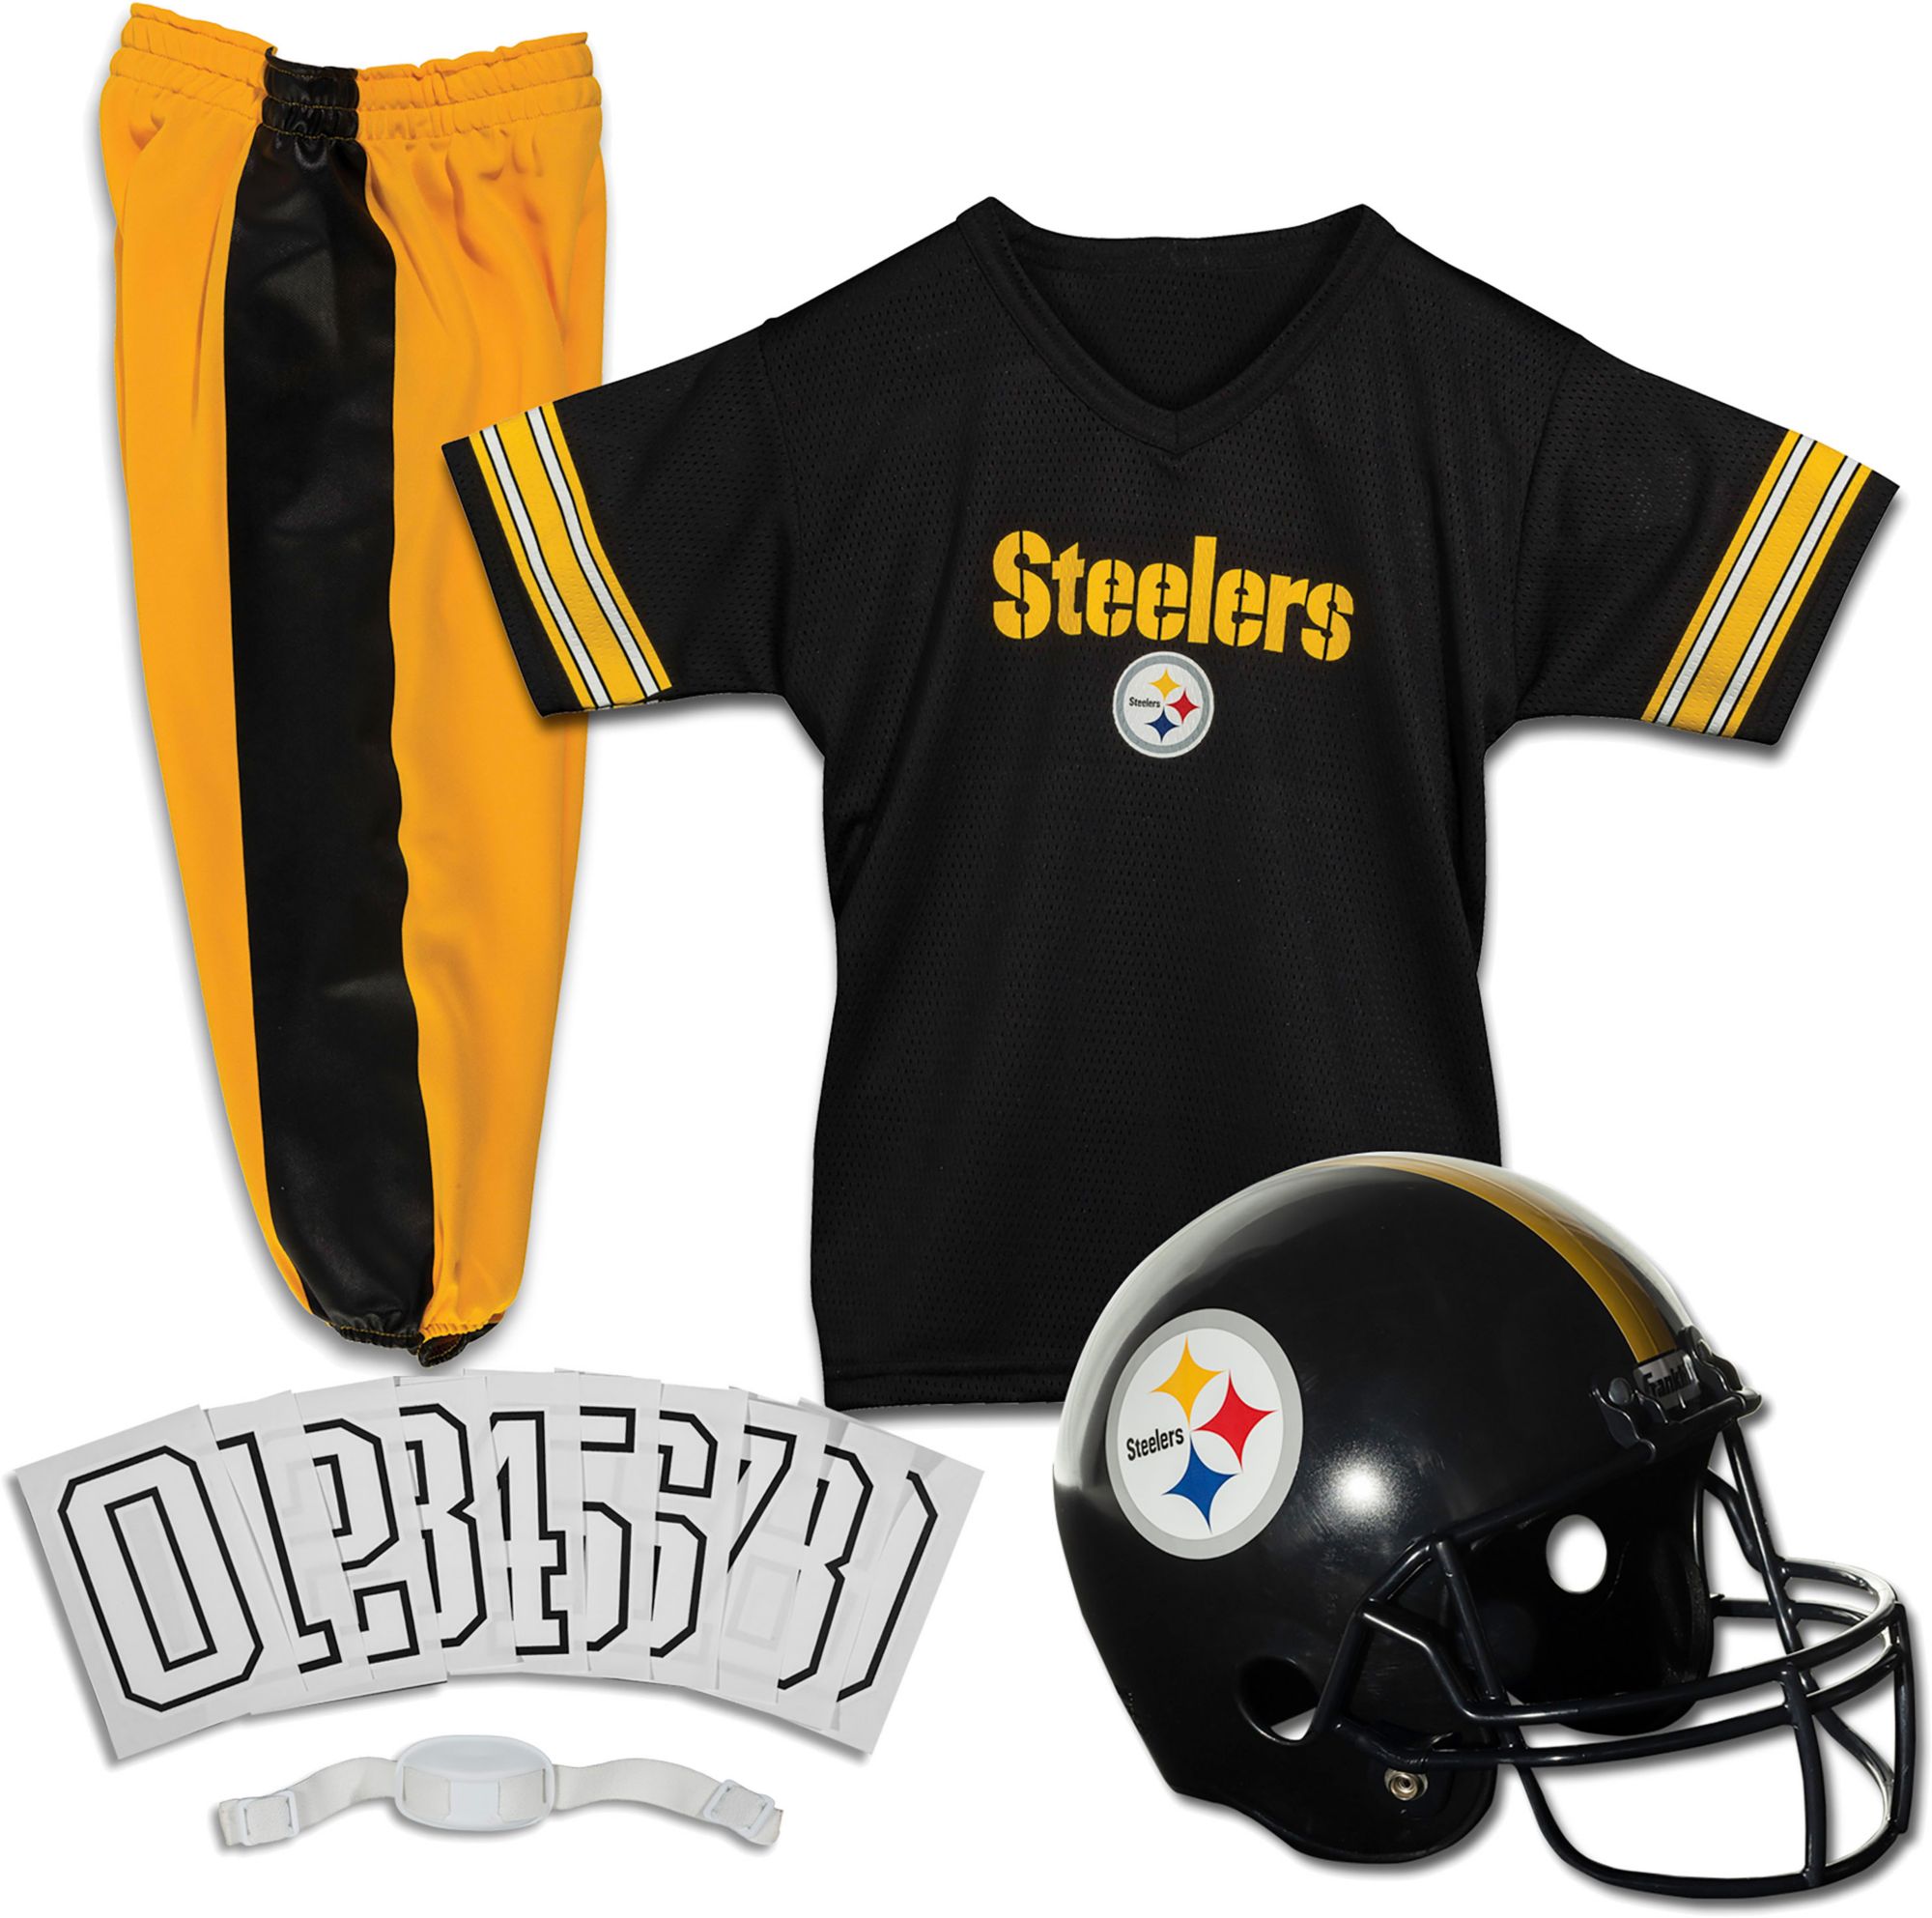 pittsburgh steelers youth football jerseys